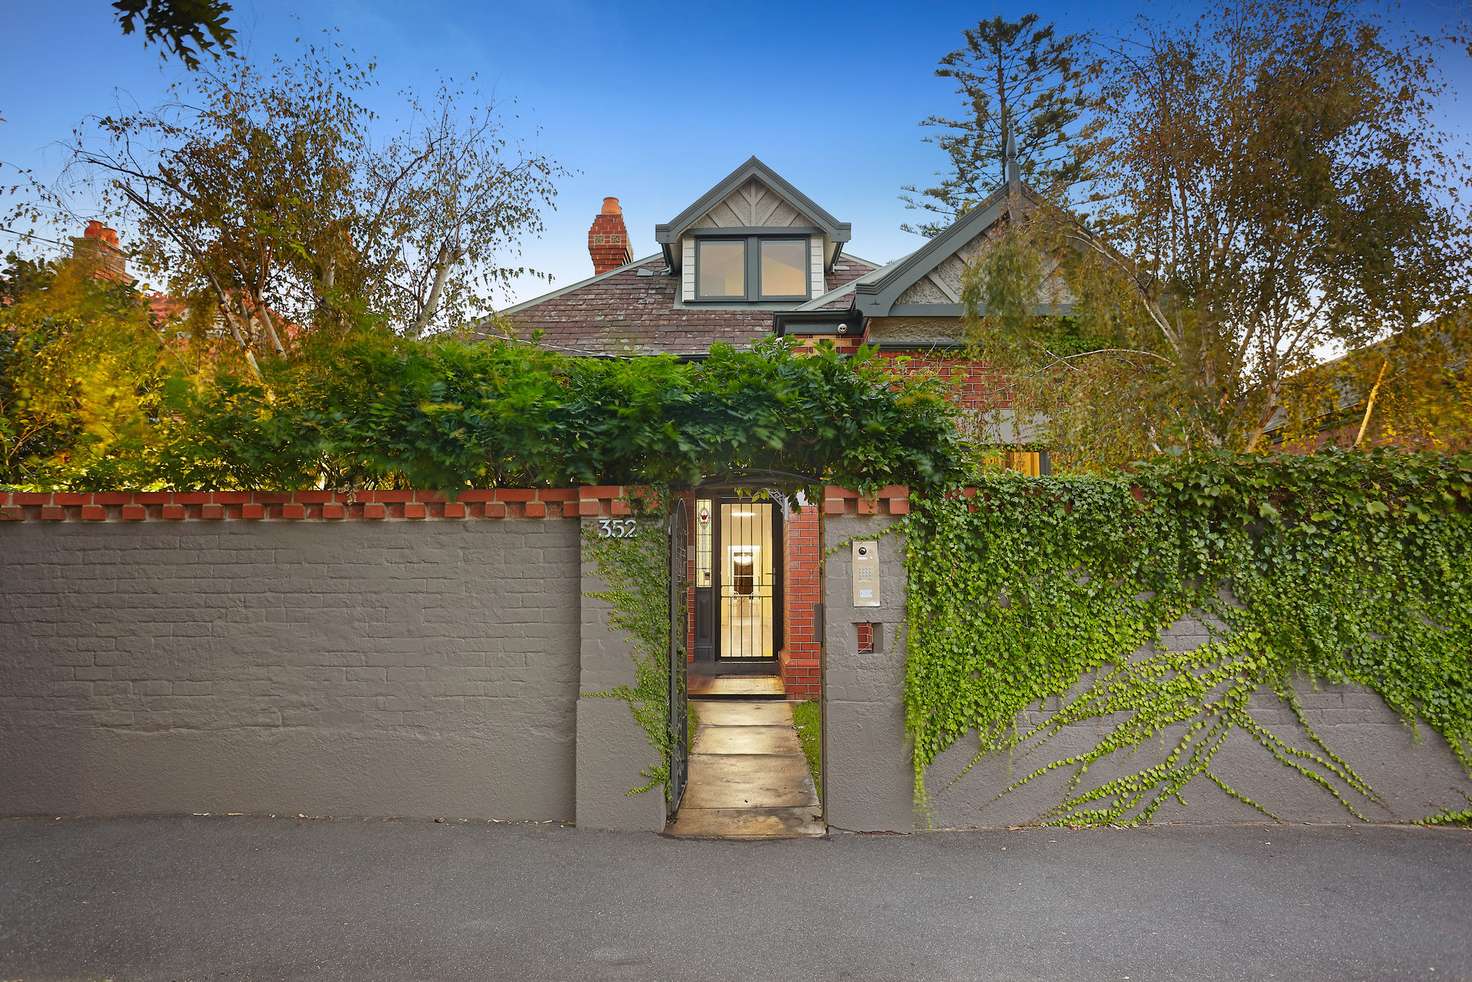 Main view of Homely house listing, 352 Danks Street, Middle Park VIC 3206